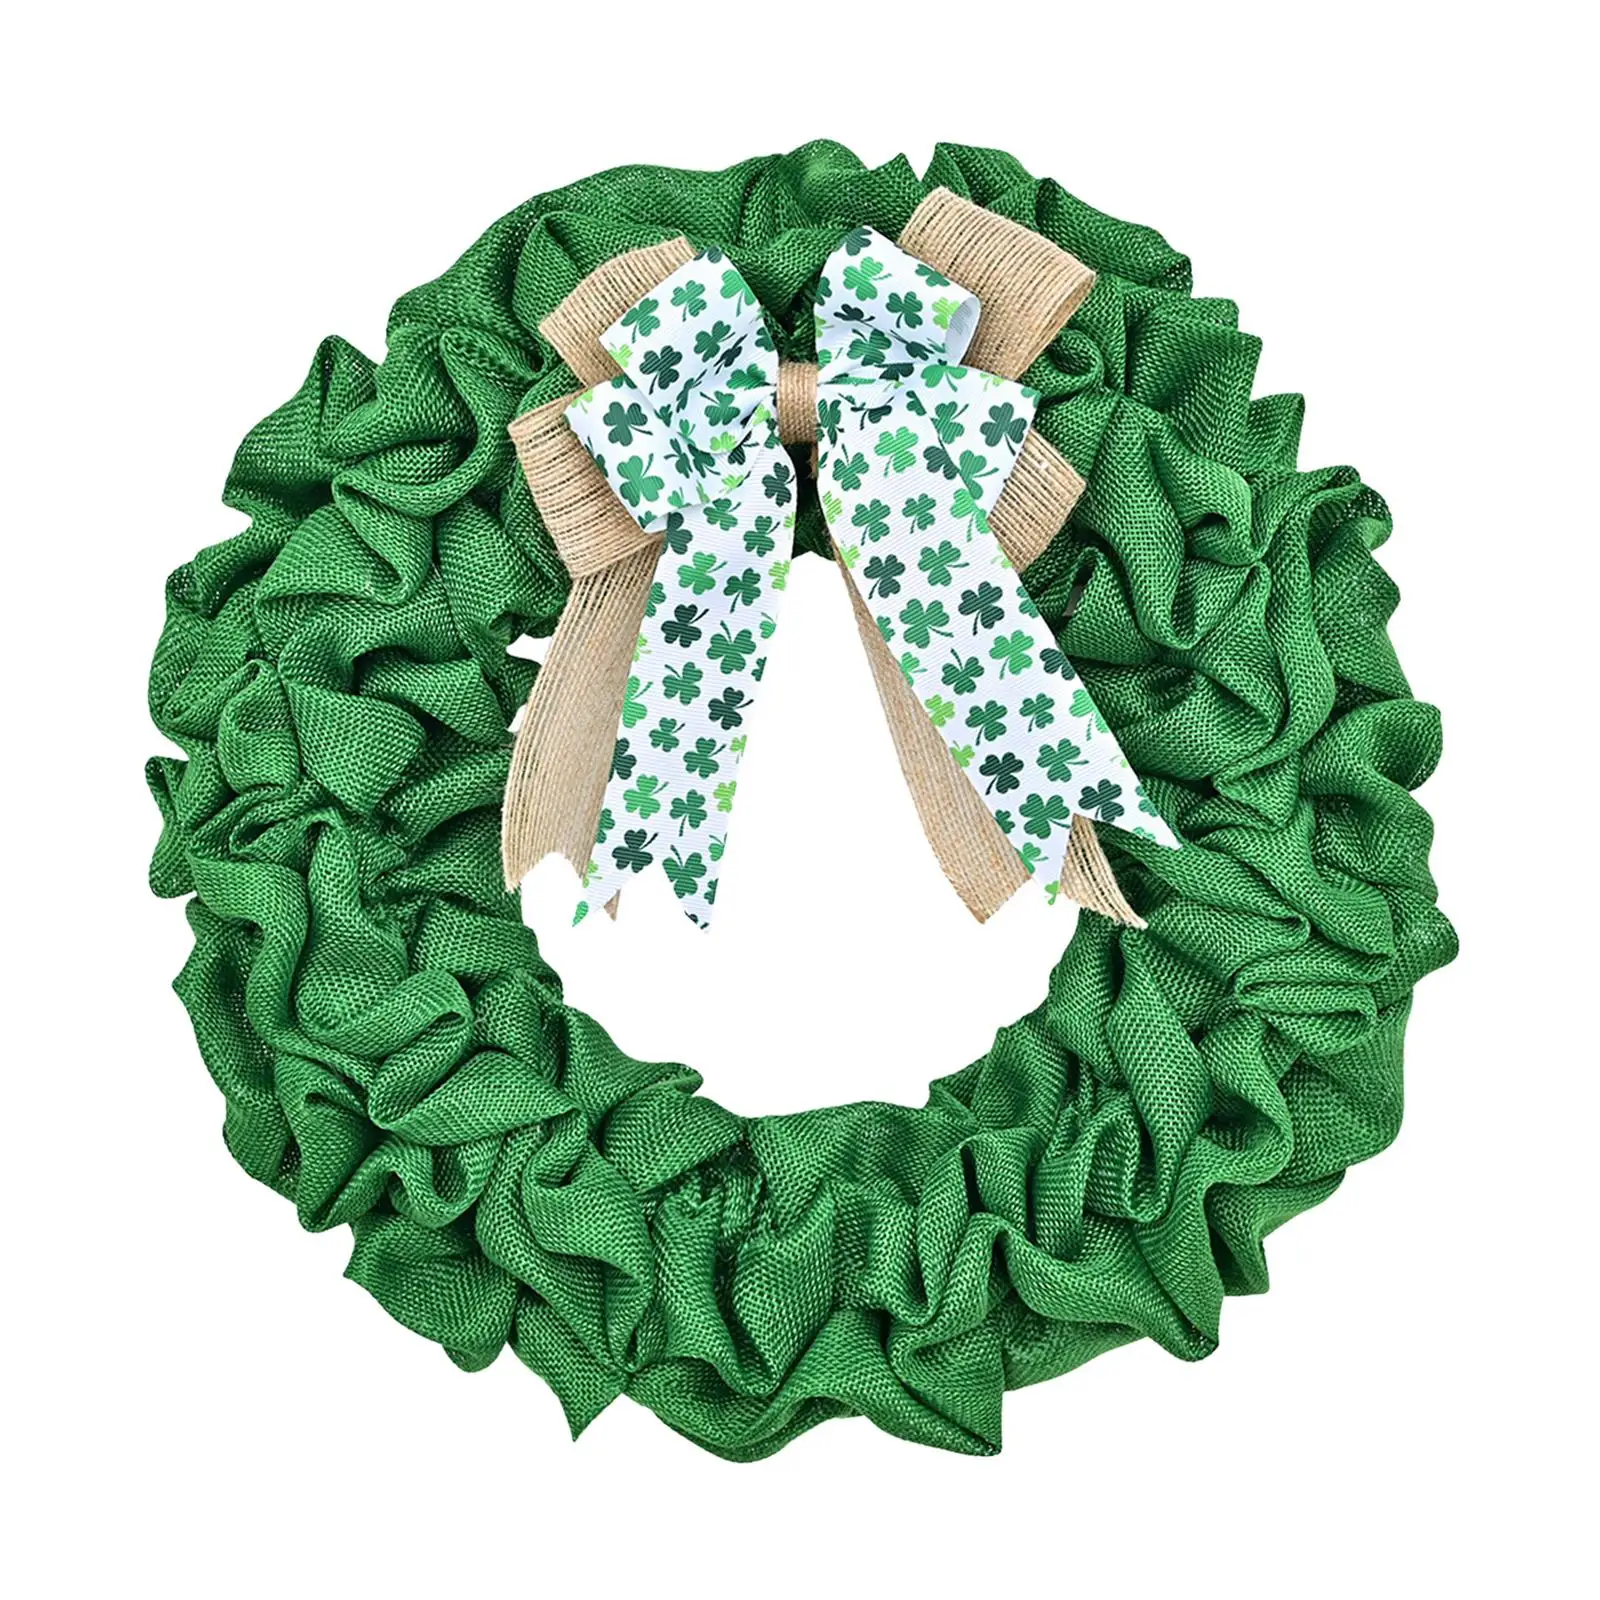 ST Patricks Day Wreath Front Door Wreath Spring Summer Party Decor Backdrop Greenery Wreath Artificial Wreath for Home Window